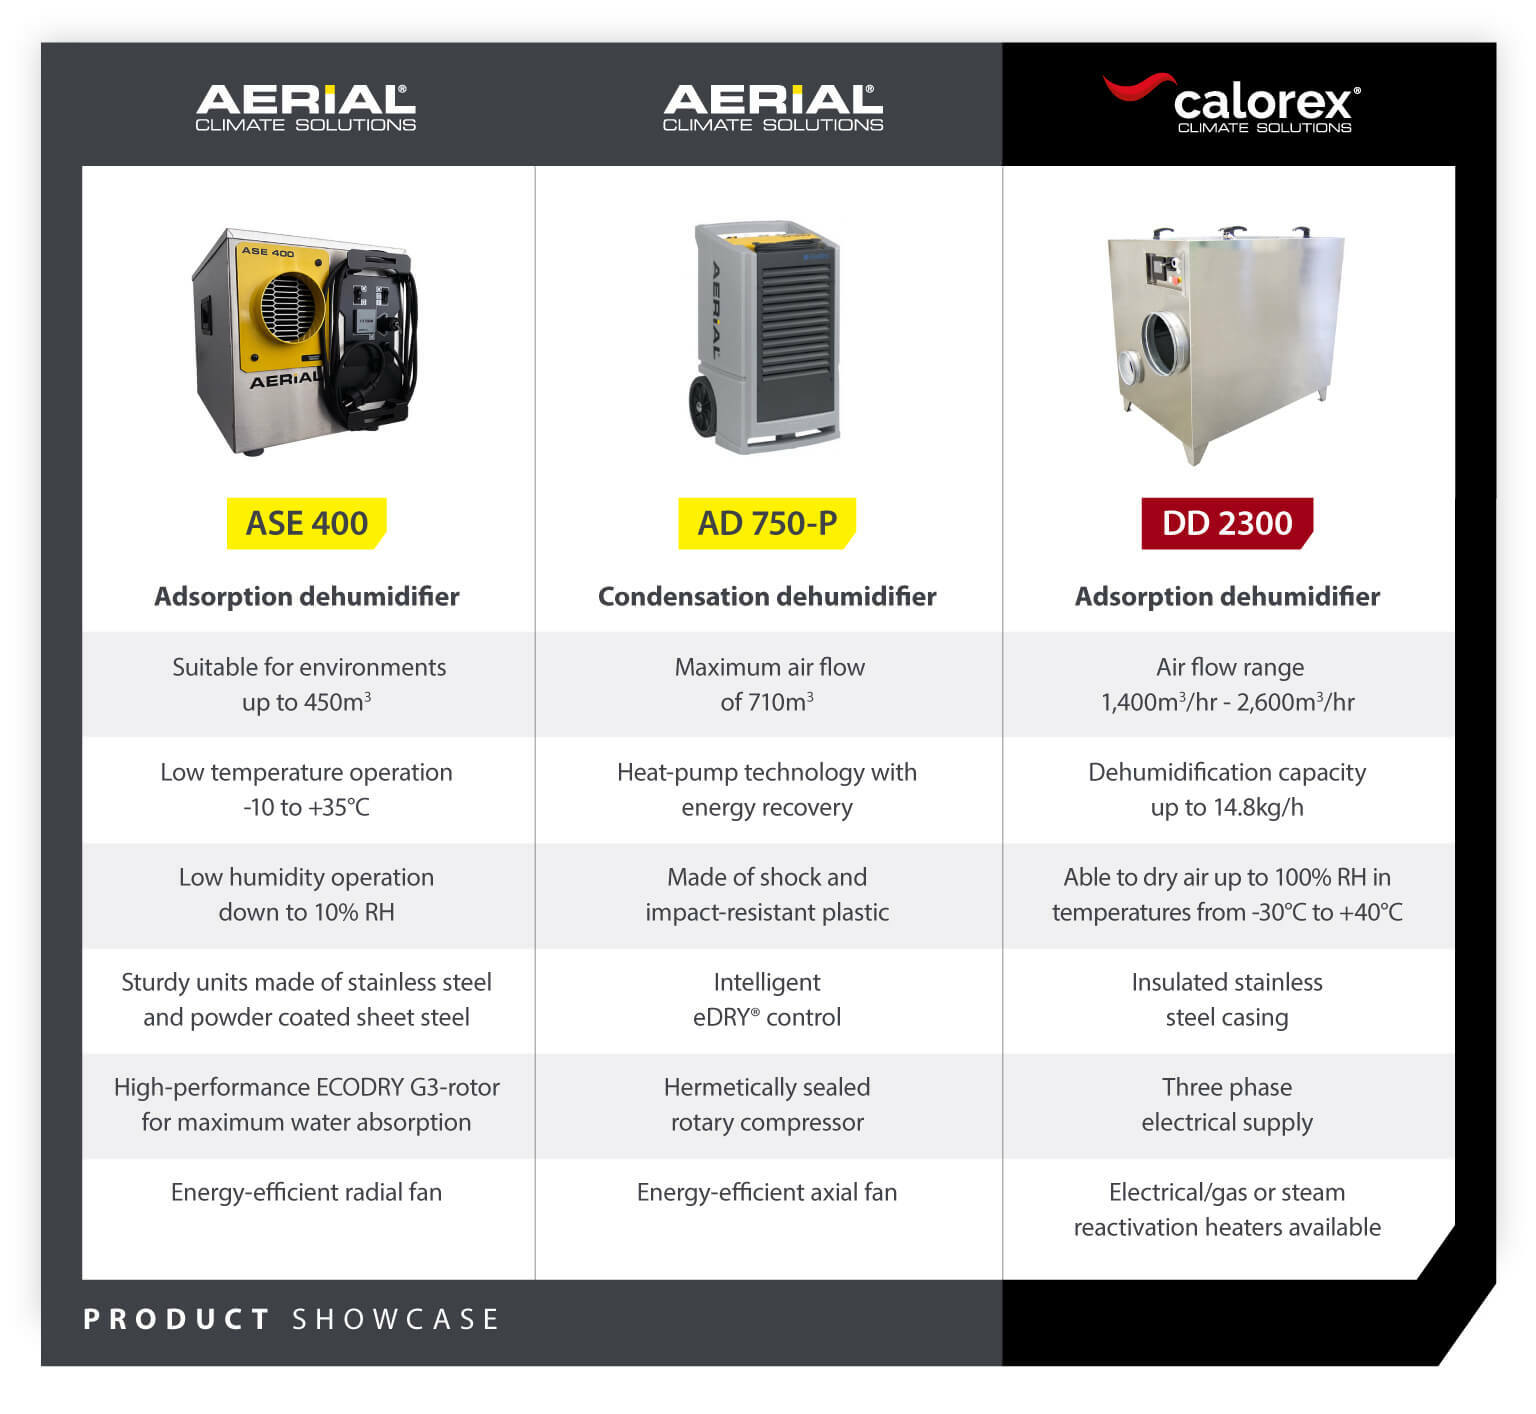 Product showcase for 3 models of dehumidifier with features comparison for building site operation - Infographic image